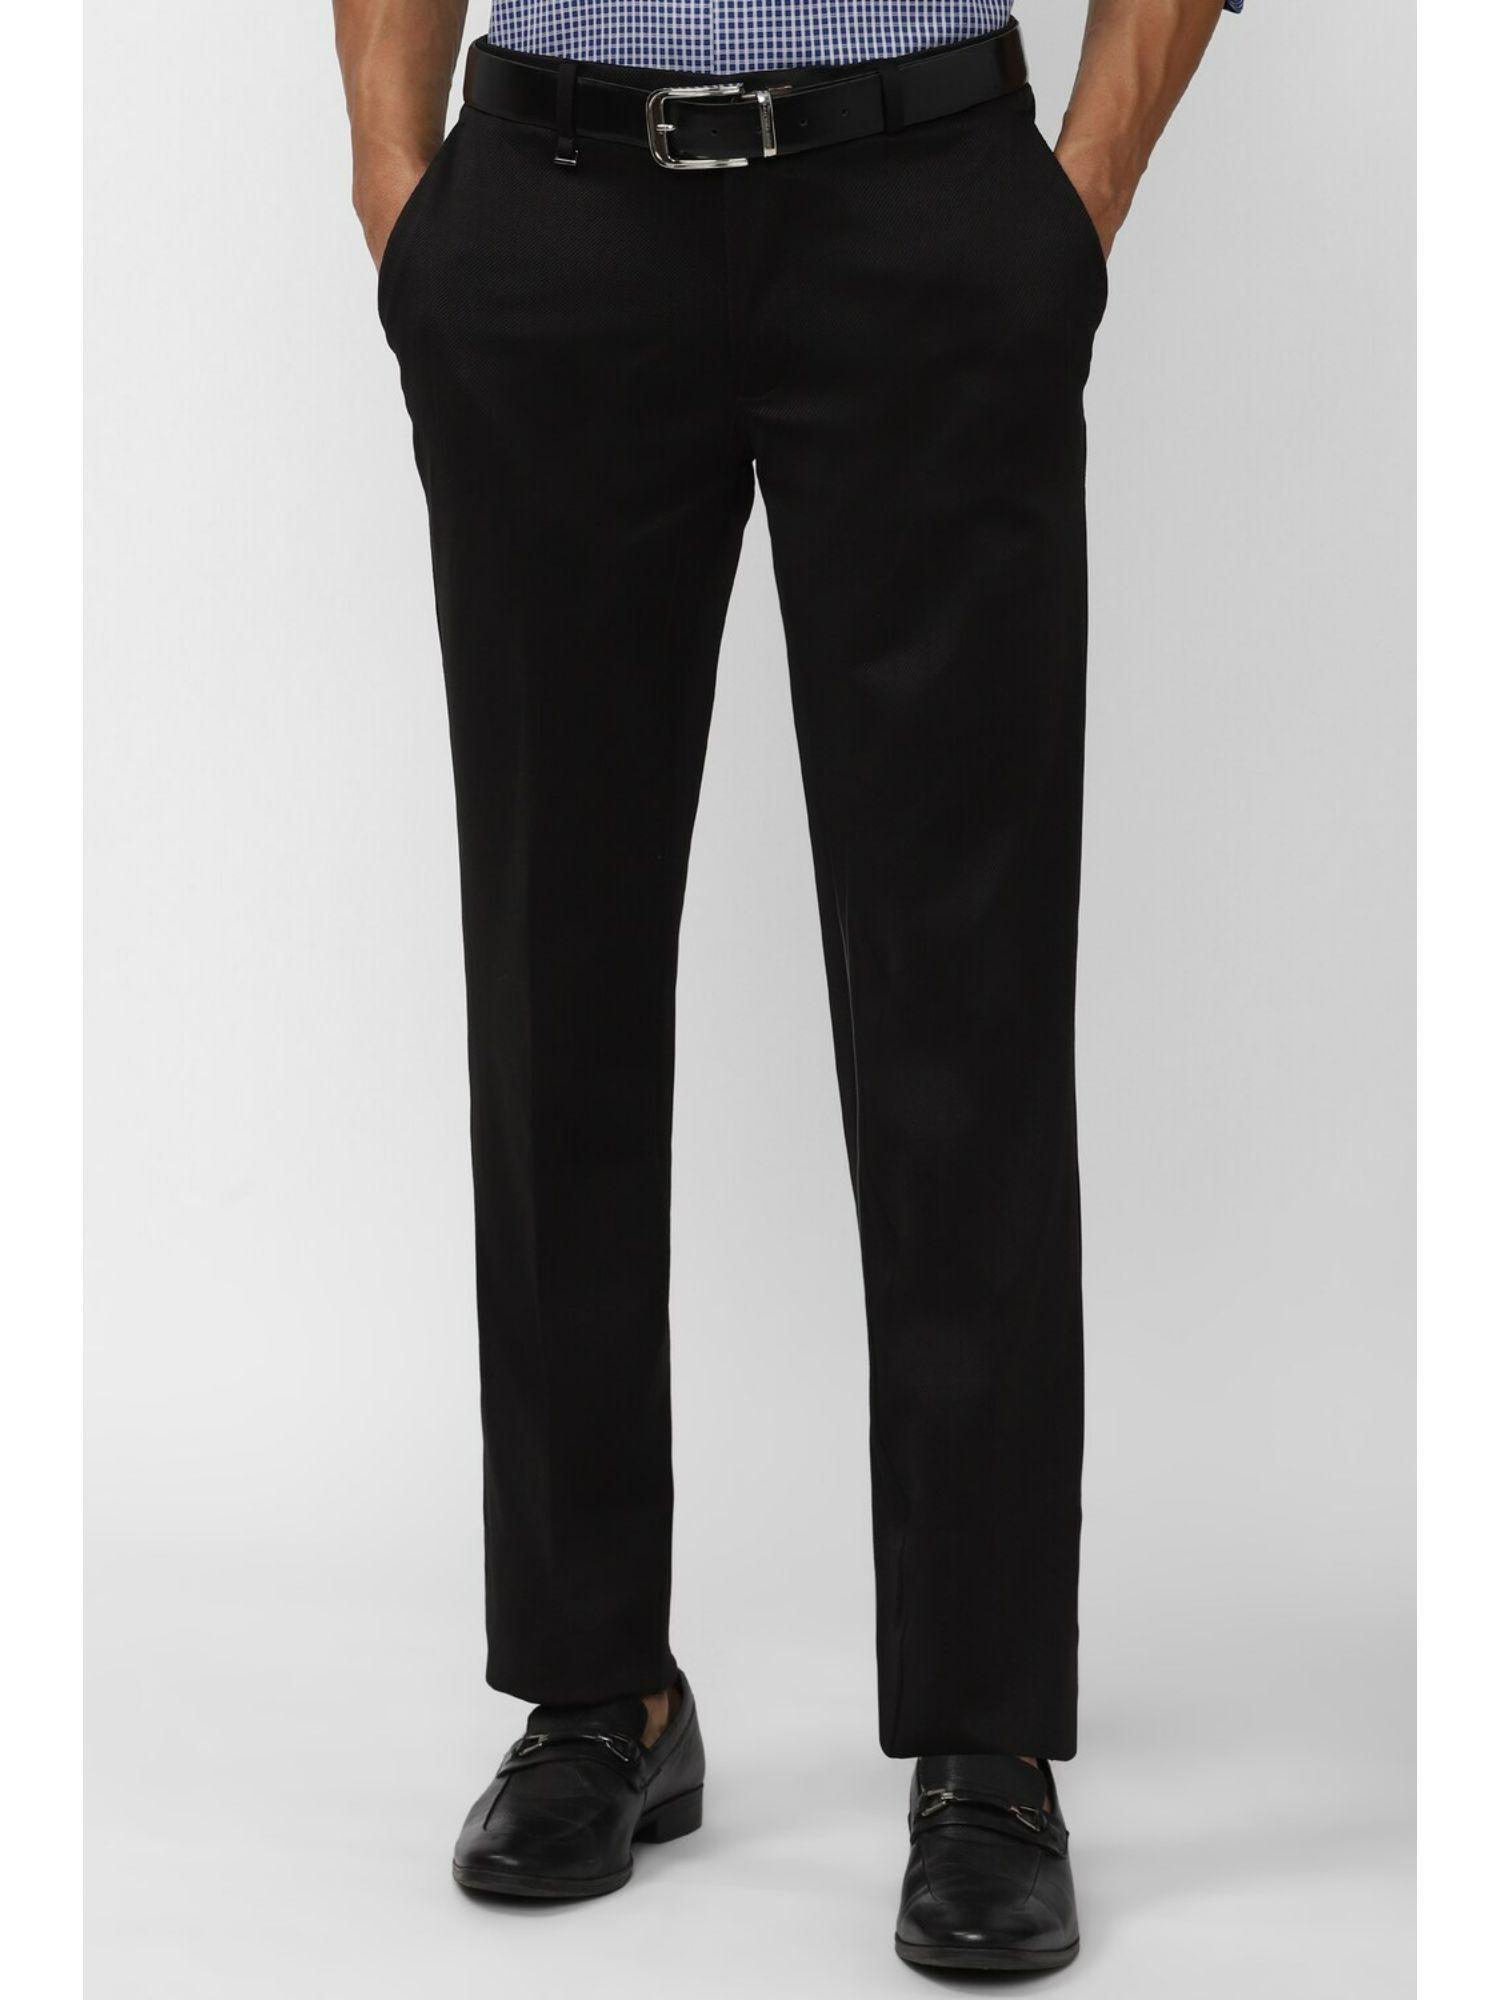 solid-black-trousers